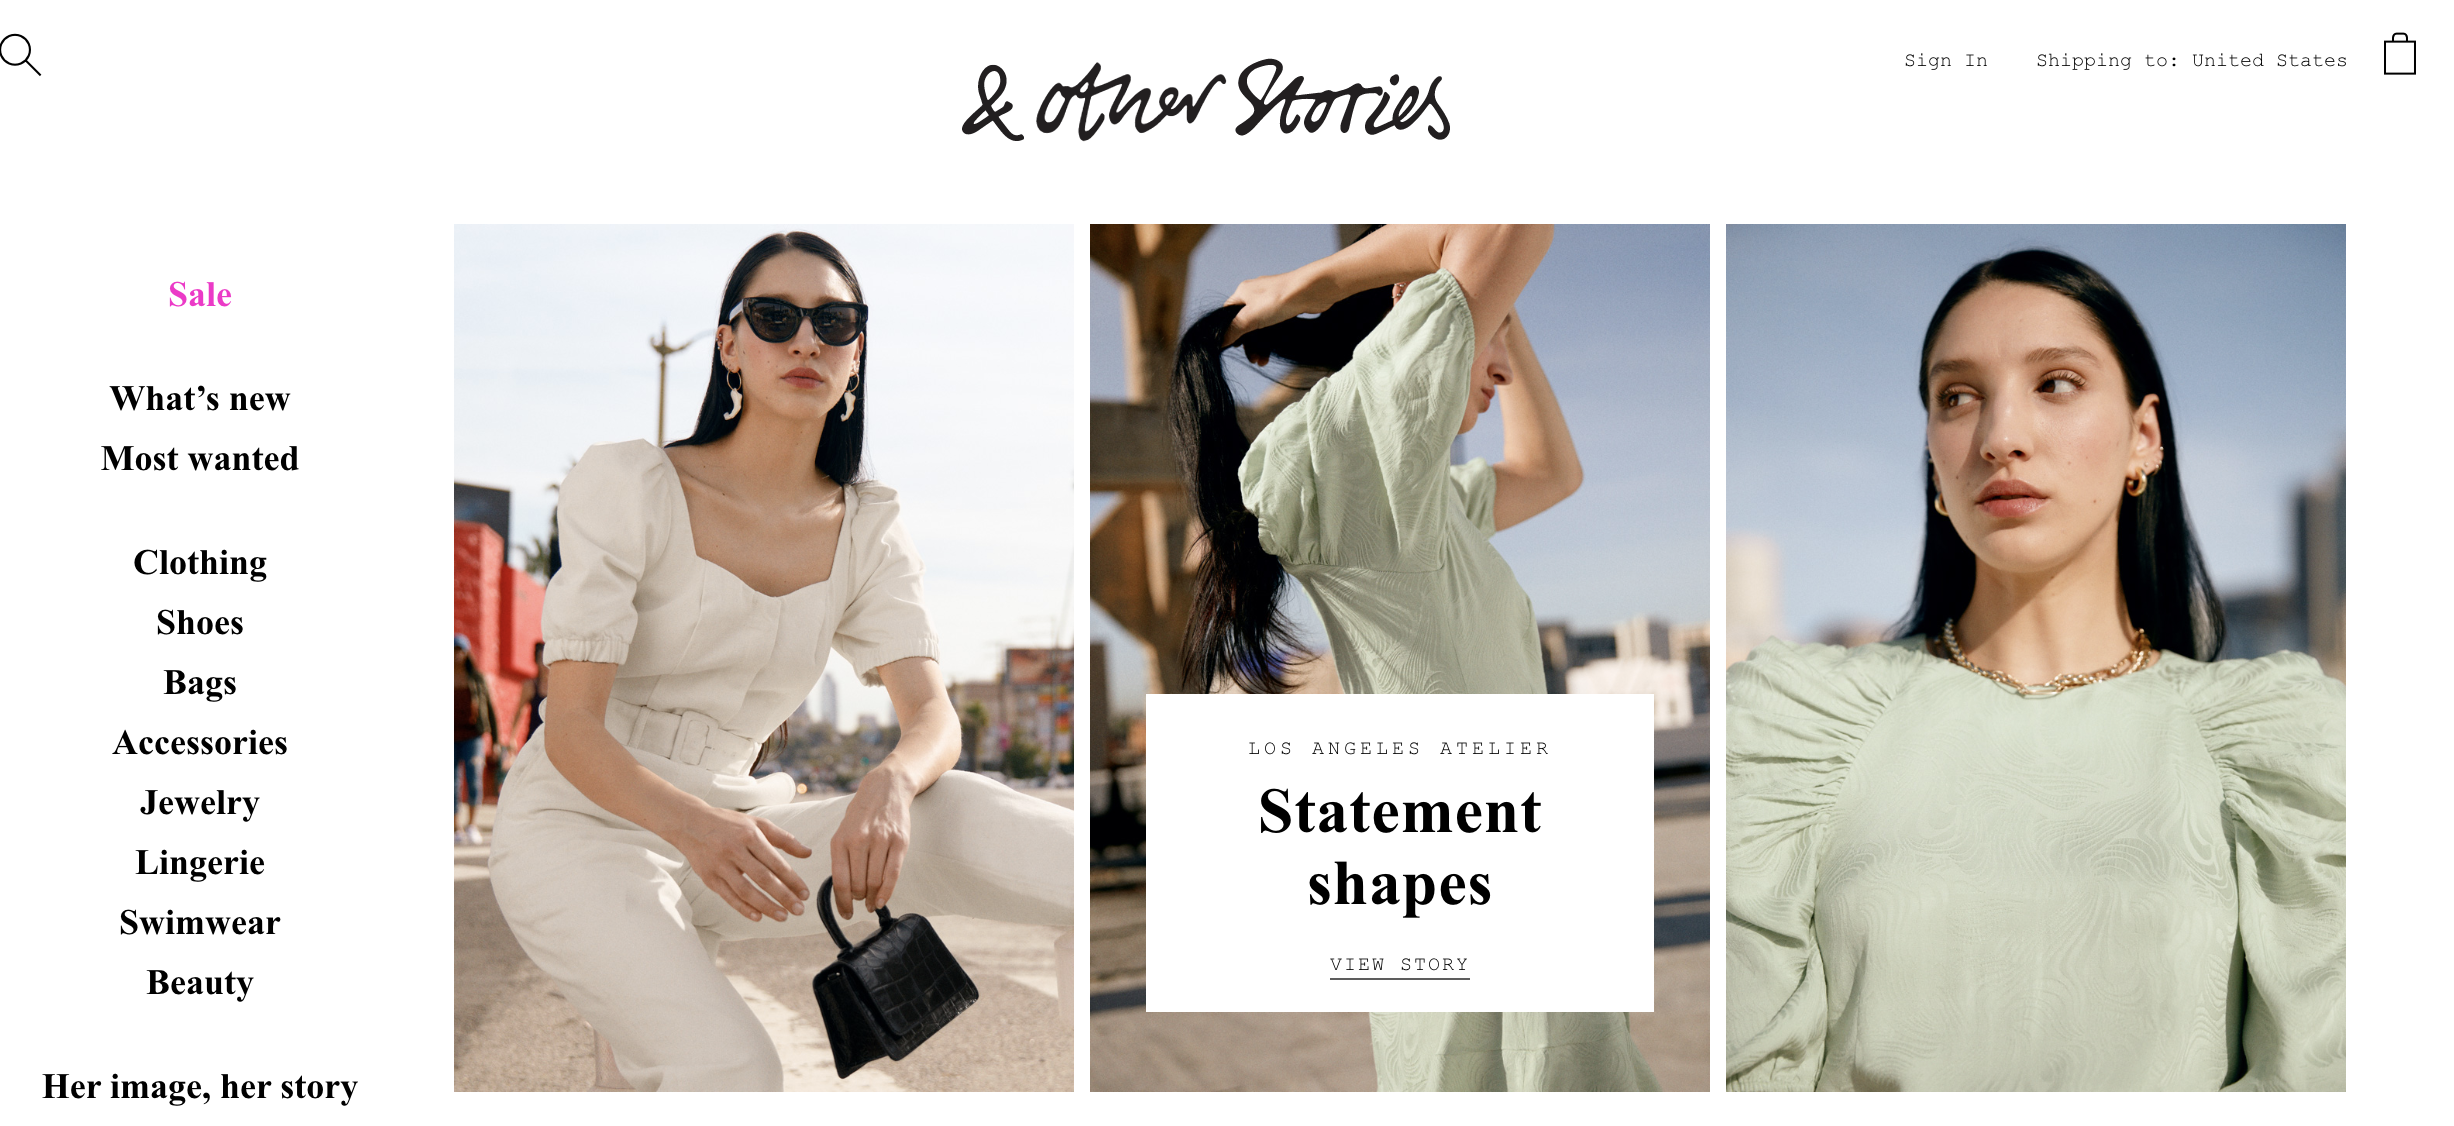 Women's Clothing Styles Online Shop